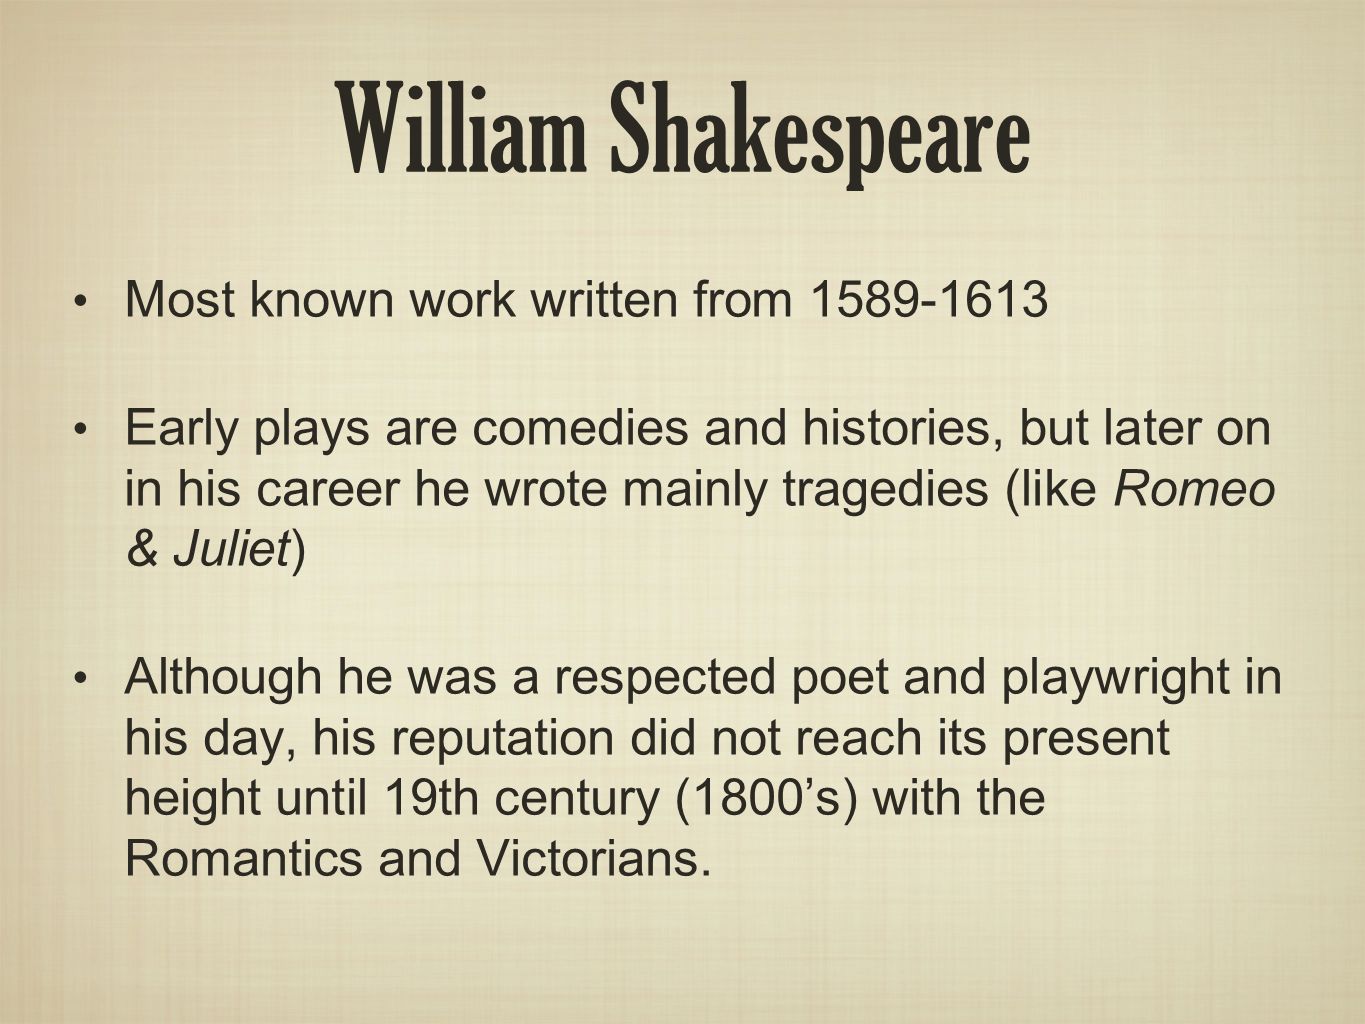 William Shakespeare: The Conspiracy Theories – Part 1